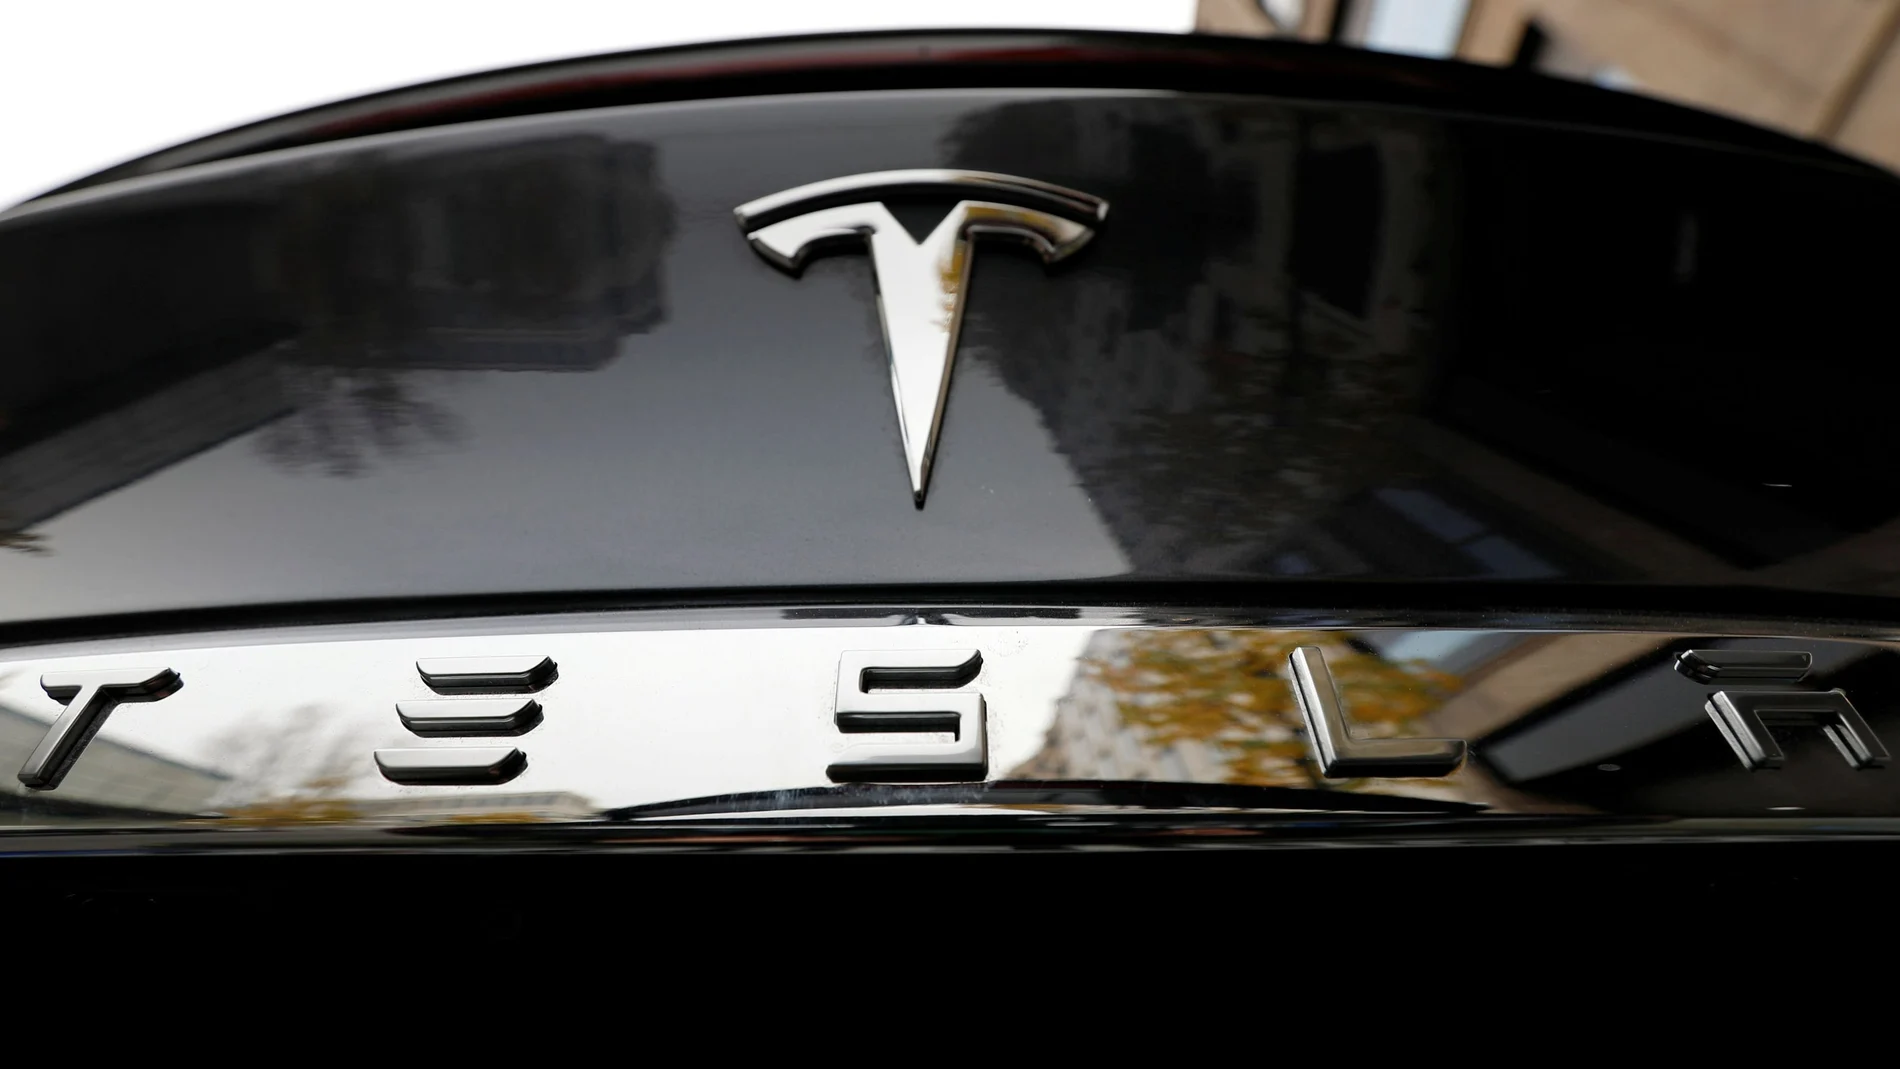 FILE PHOTO: The company logo is pictured on a Tesla Model X electric car in Berlin